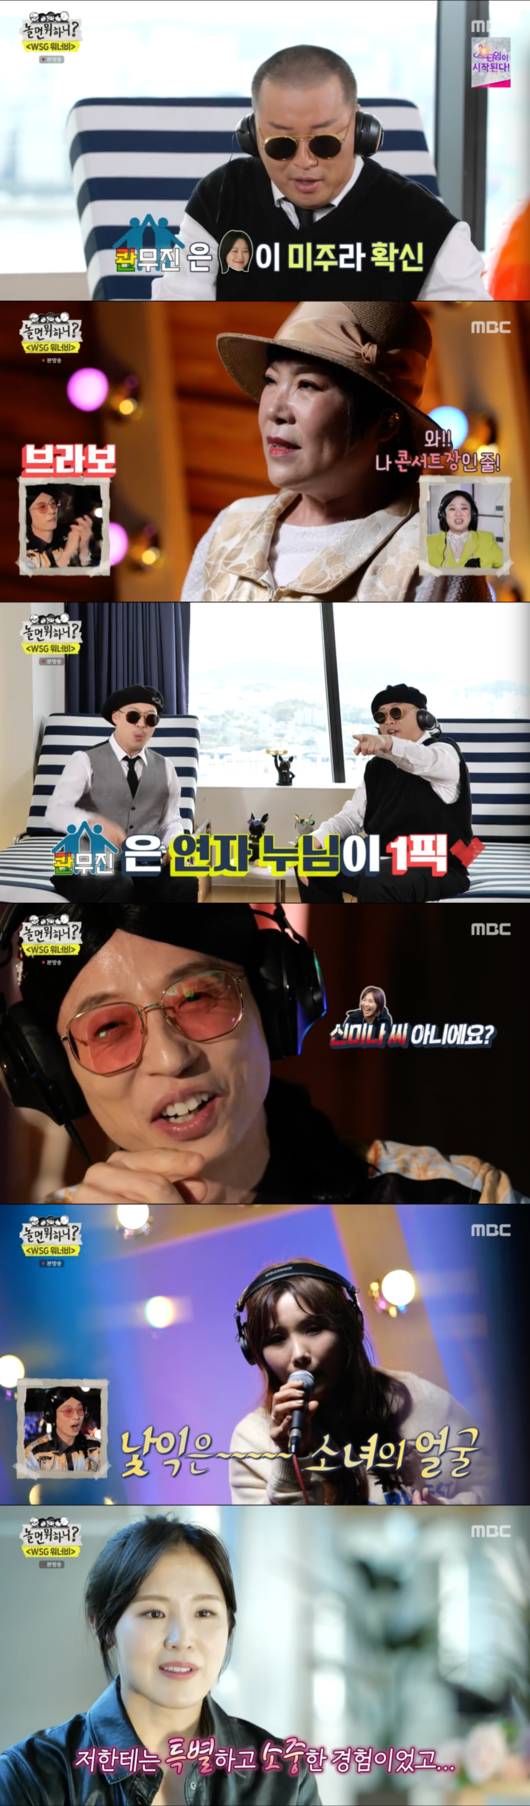 Yonja Kim, Shin Bong-sun and Kim A-lang were eliminated from MBC Hangout with Yo WSG Wannabe Project Blind Audition.On the 30th, Yoo Jae-suk, Kim Sook, and Kwan Moo-jin (Haha - Jung Jun-ha) were convinced that the performer with Lady Gagas name tag was a trot singer Yonja Kim as soon as she called for Lim Jae-beoms For You.Elena Kim praised her as a man who can hold him in Elenas bowl, and Quan Mujin even made a big bow.However, Yupalbong said, I can not be with us because I am already a big star and I am a current legend.Scarlett Johansson then sang a broccoli-song, and when she noticed the voice, Elena Kim said, Its the jewel I know. Its a good vocalist and a good harmony.He is a necessary person in the group, he said.But Yupalbong, who thought of him as Shin Bong-sun, said, It is an analogous voice. It seems to have practiced a lot and it is not bad.Its not a song I cant sing, but its not like this: Lets go. I gave an Acceptance with Quanmujin.There were also mixed reviews about Han So-hees songs.He gave him an Acceptance, which emits a lovely charm by singing I do not know love yet, and Yu Sung-bong and Elena Kim were eliminated.The main character of the voice is short track national team Kim A-lang.I was just about to go to Canada, but I thought I might have to practice, so I called them out, hoping that they would be as excited as I was.It was a short time, but I did not say much about managing my neck. It was a song I prepared with my neck, but it was a pleasant but pleasant experience.I was able to enjoy it when I met you, Mr. Yupalbong, he said, smiling.As a result, the WSG Wannabe Project Blind Test Acceptance was selected by Kim Hye-soo, Lee Sung-kyung, Sophie Marso, Kim Seo-hyung, Song Hye-kyo, Kim Go-eun and Son Ye-jin, followed by Gong Hyo-jin, Anne Hathaway, Kim Tae-ri and Na Moon-hee.In particular, Yoo Jae-Suk and Haha, who heard the song of Gong Hyo-jin, were convinced that the Americas were the Americas and attracted attention by saying, The Americas has cut the sword.hangout with yo